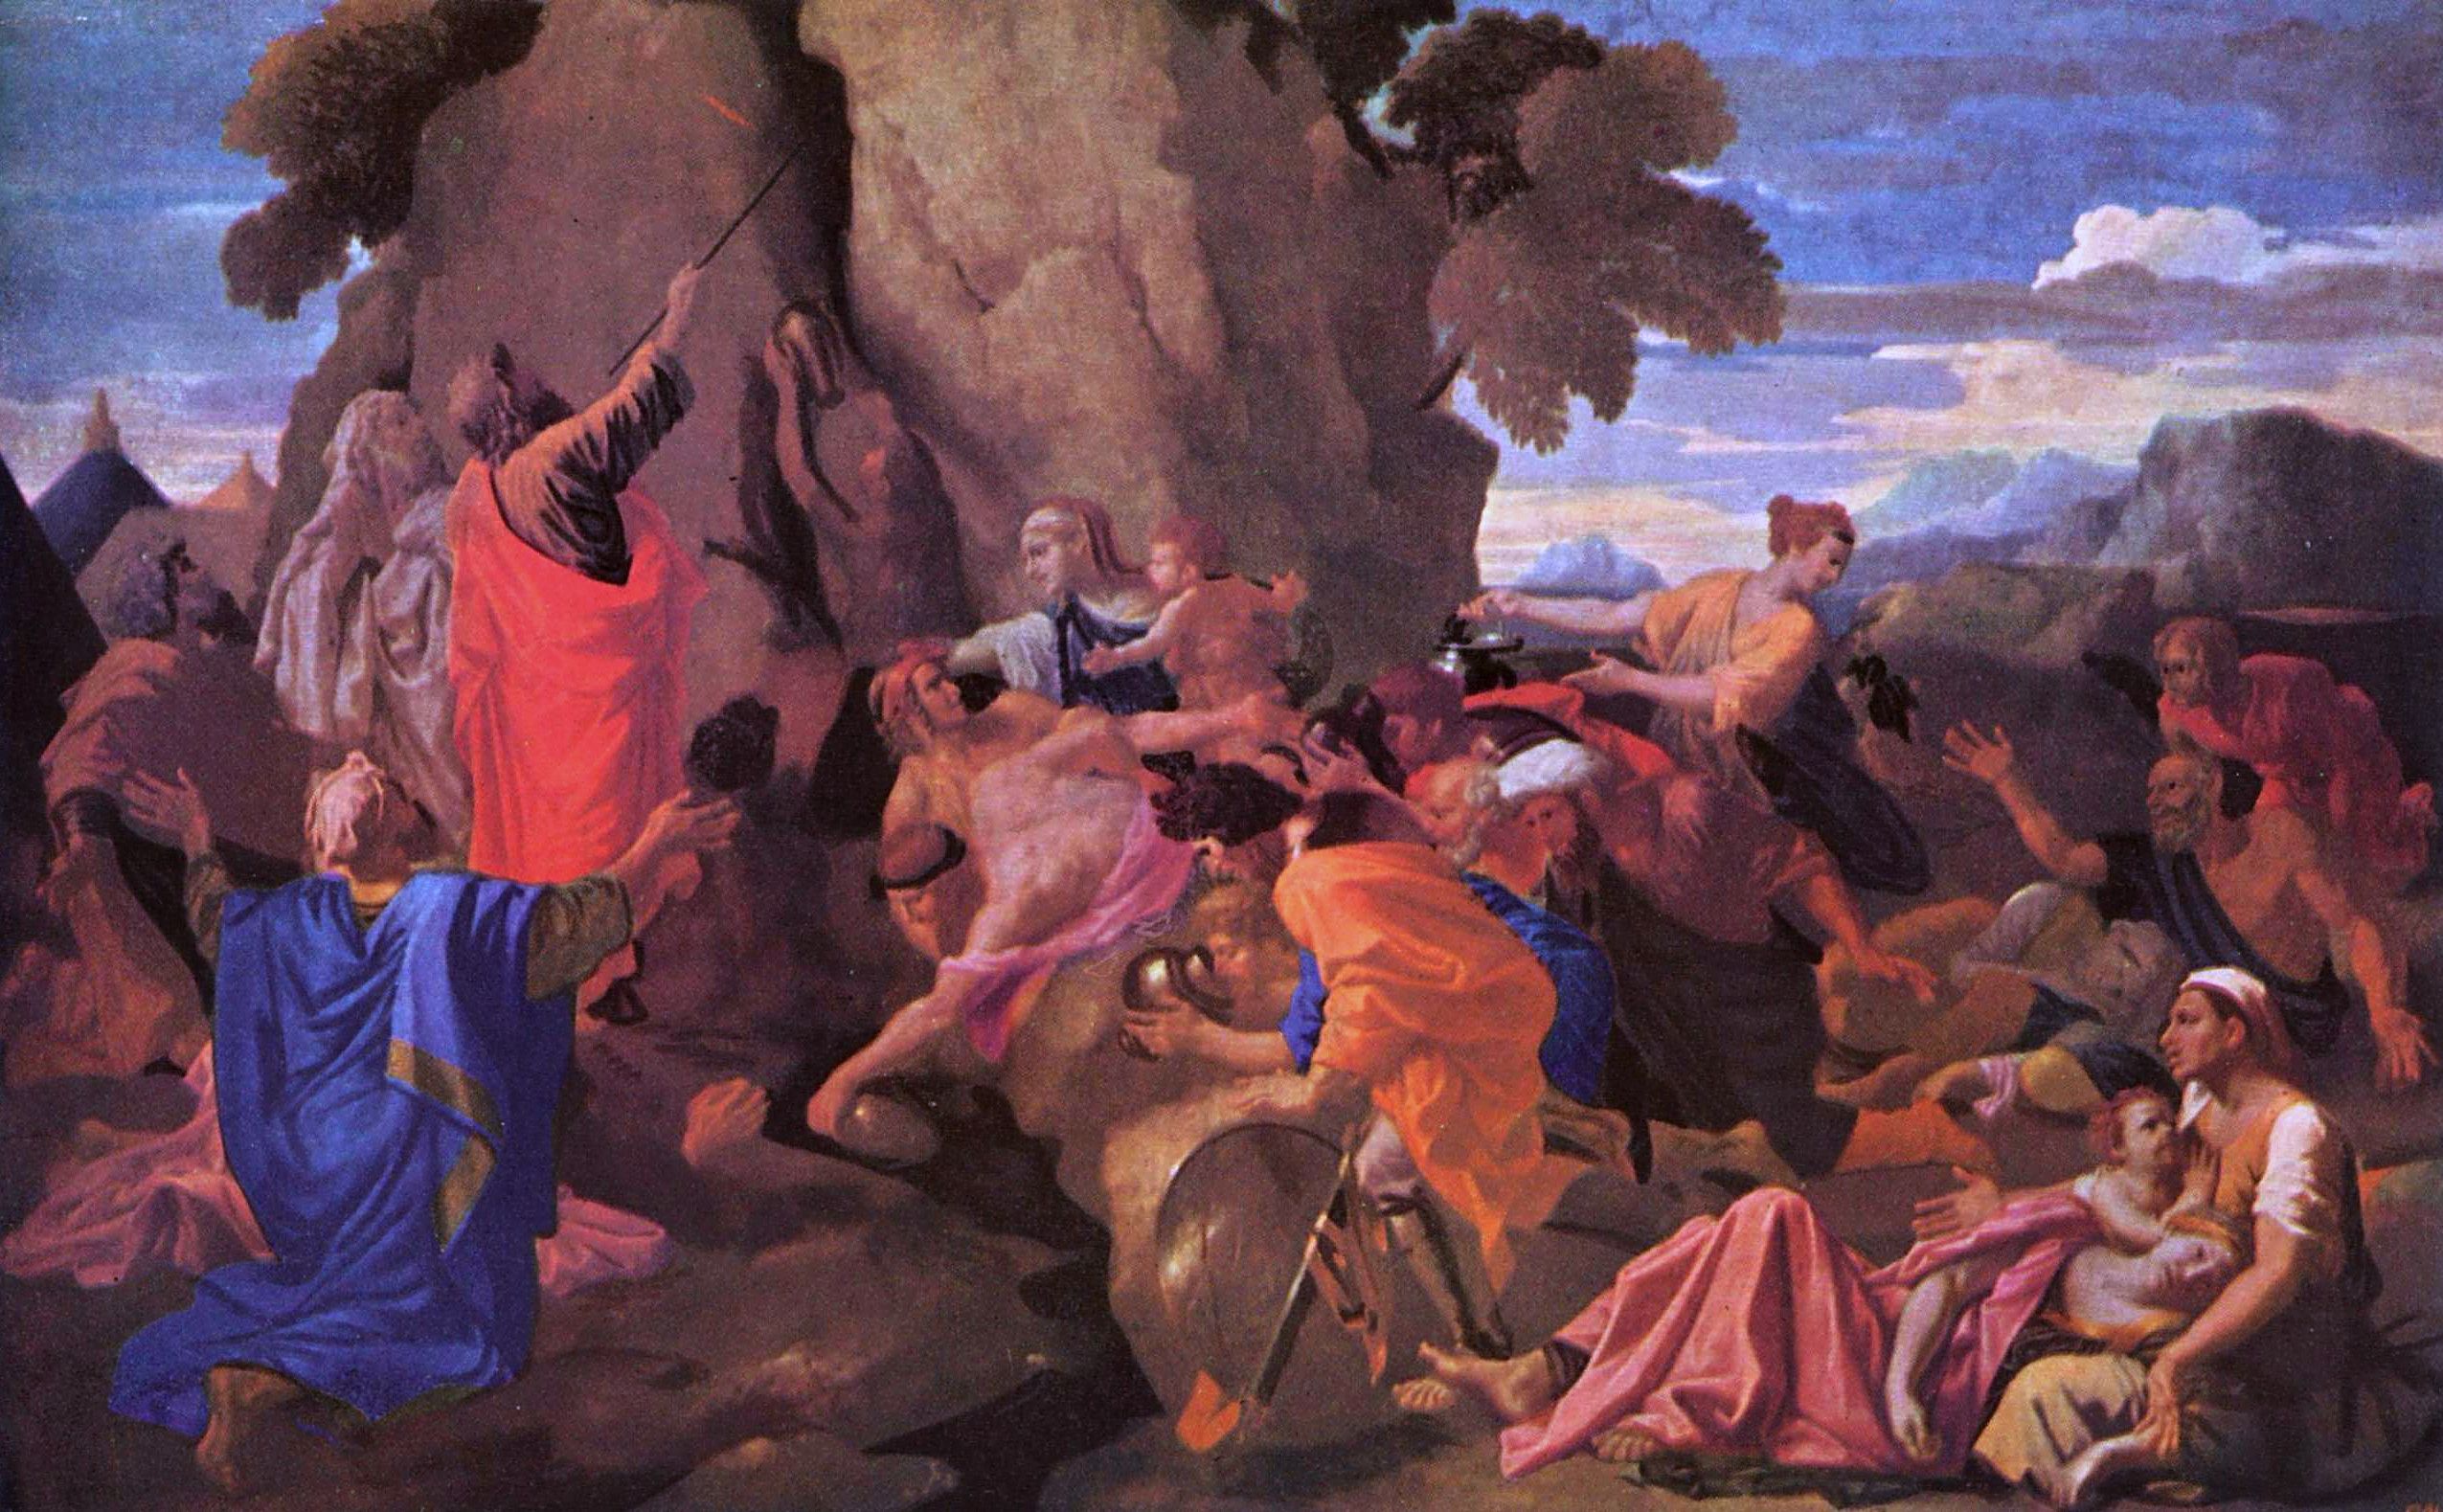 Poussin, Nicolas - Moses Striking Water from the Rock - 1649